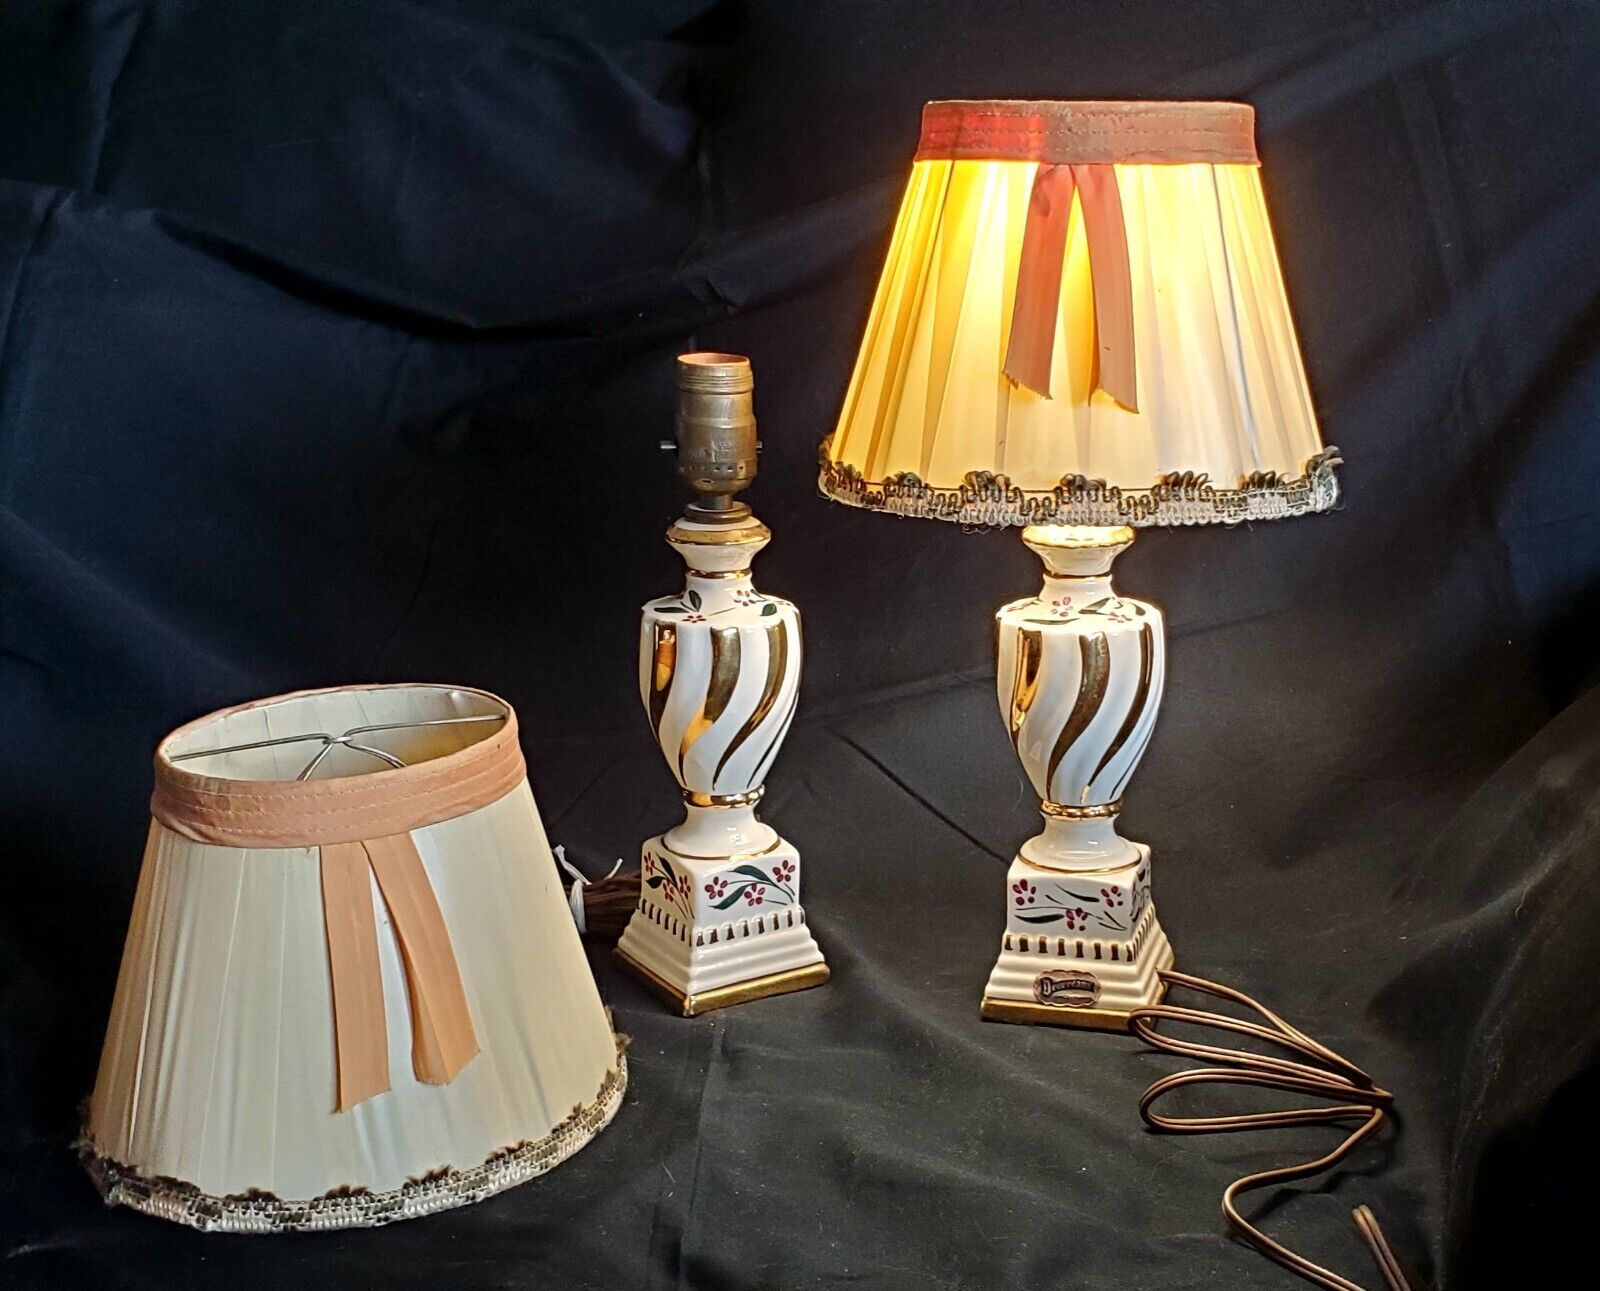 ANTIQUE Pair of 1940s Devereaux China Porcelain, Hand-painted Lamps (w/shades)